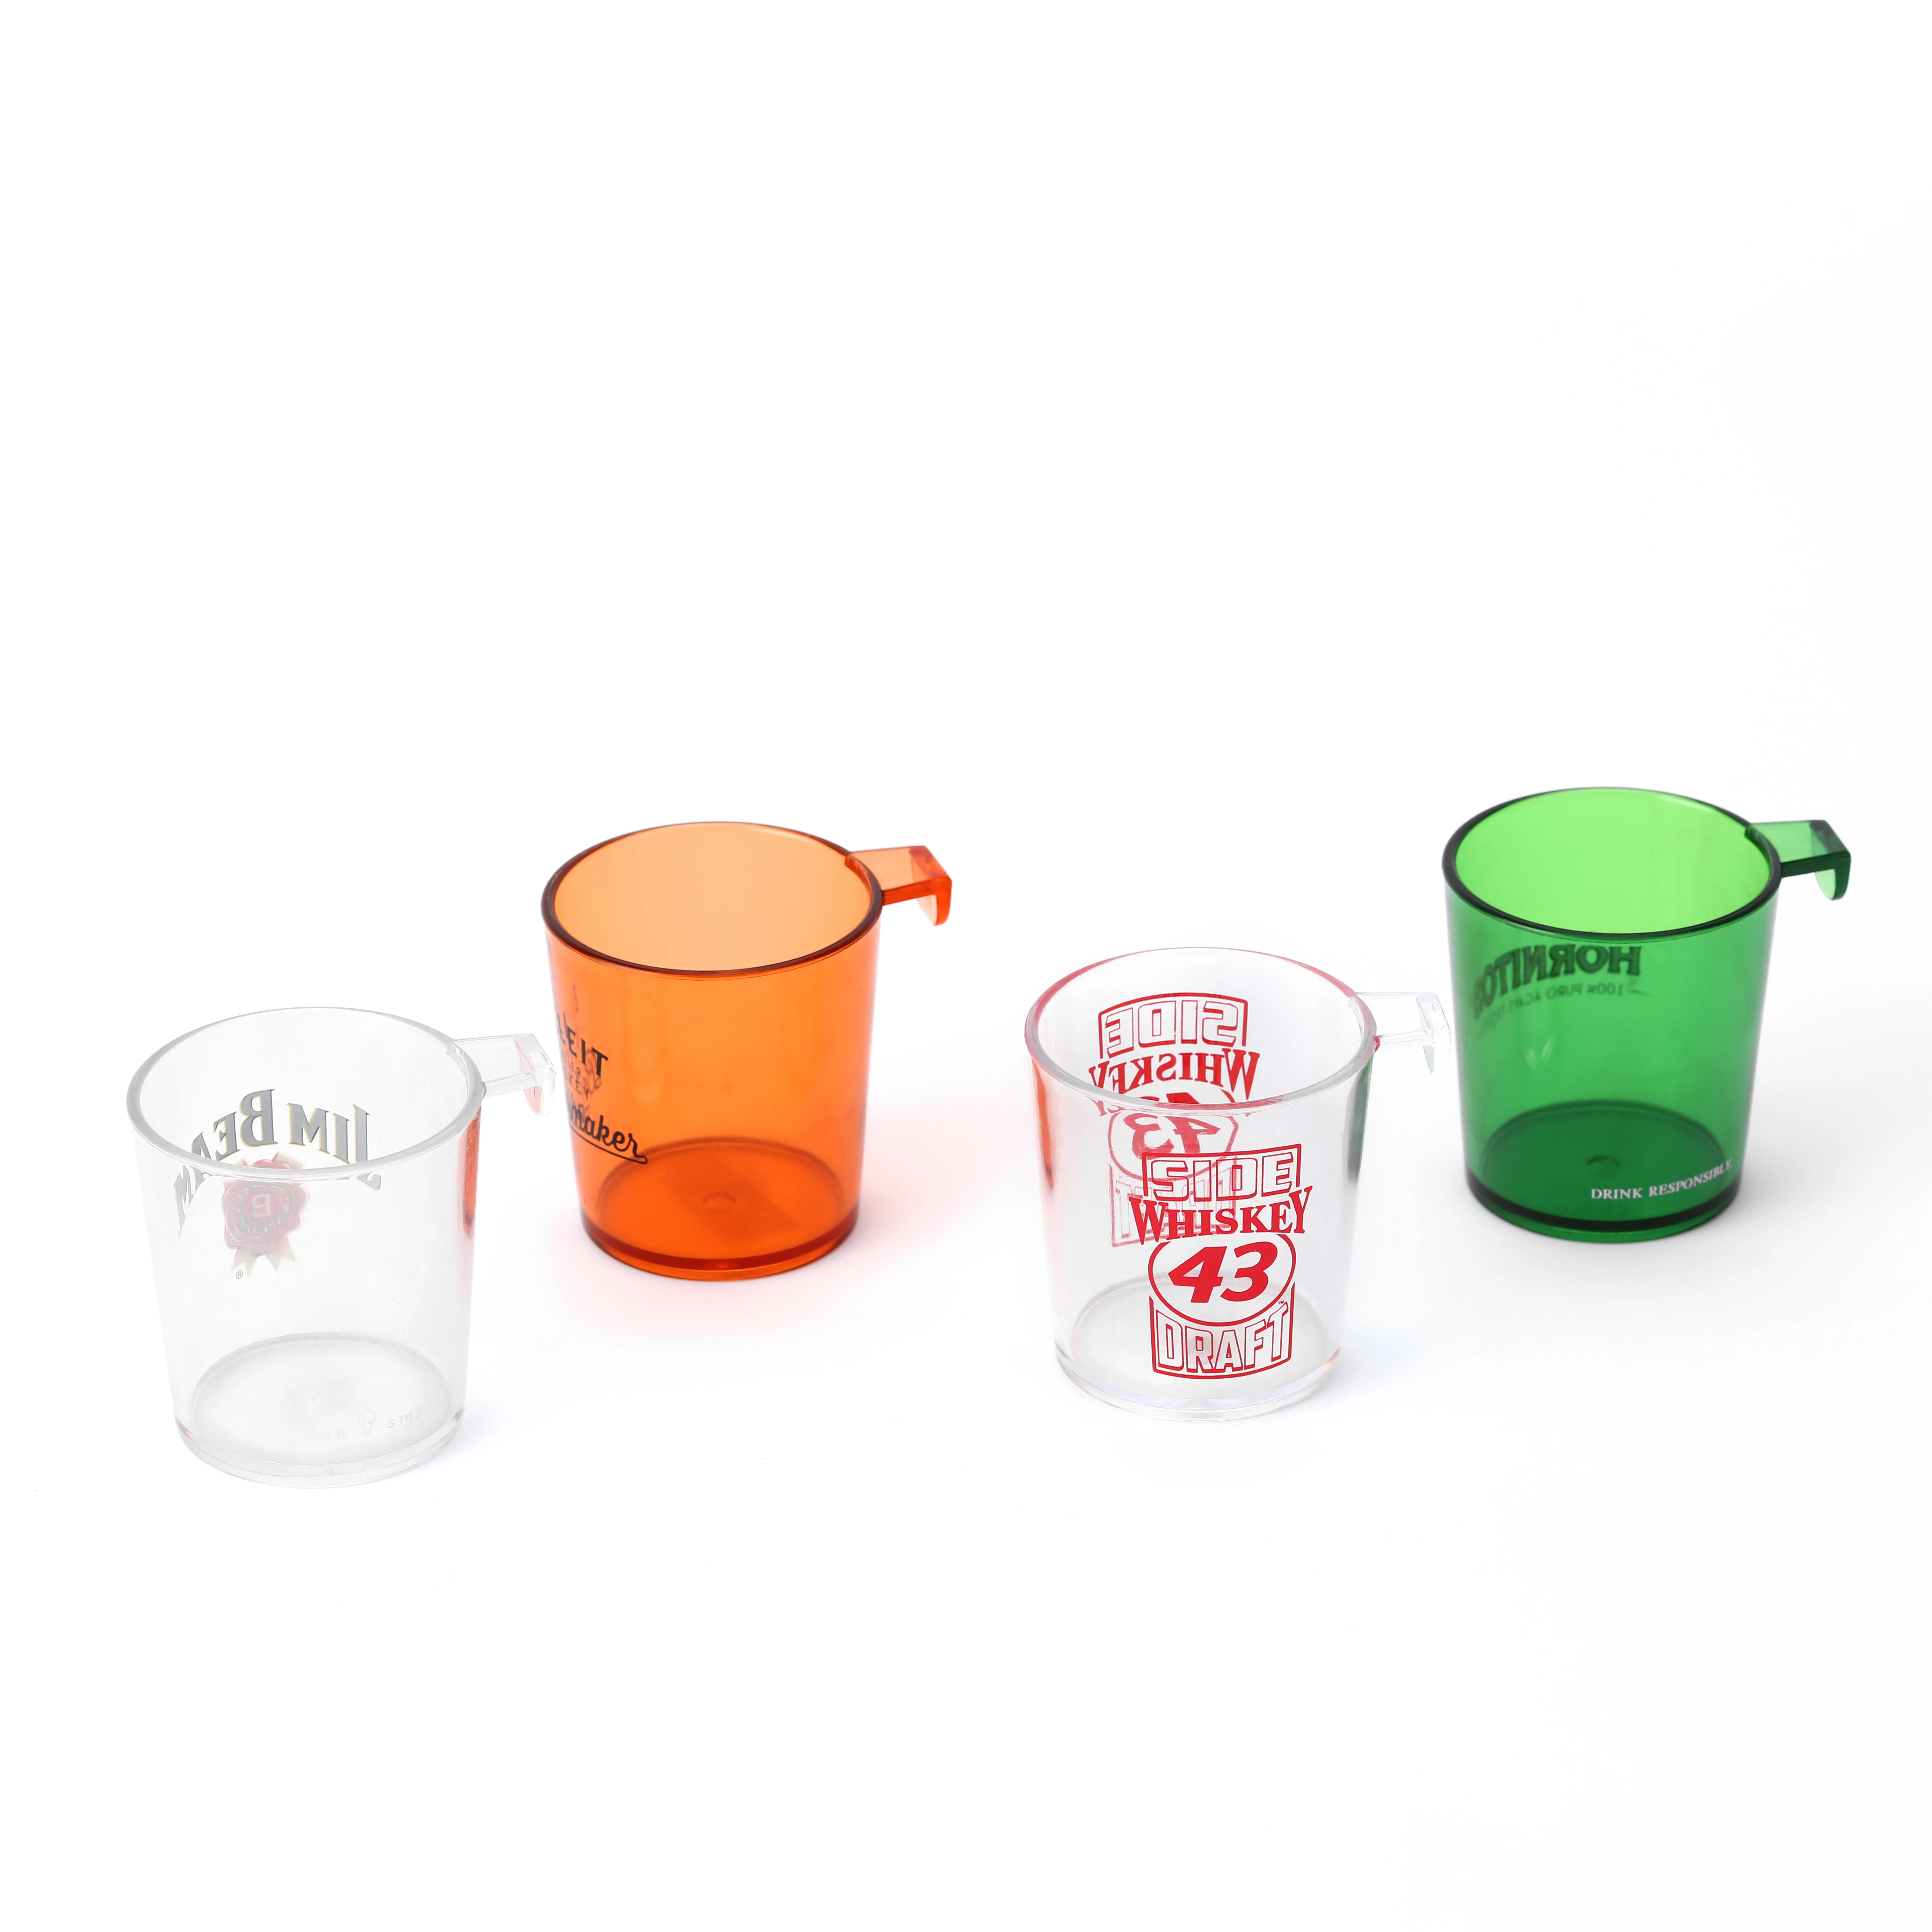 1.5 oz plastic shot glass with hook for parties and events